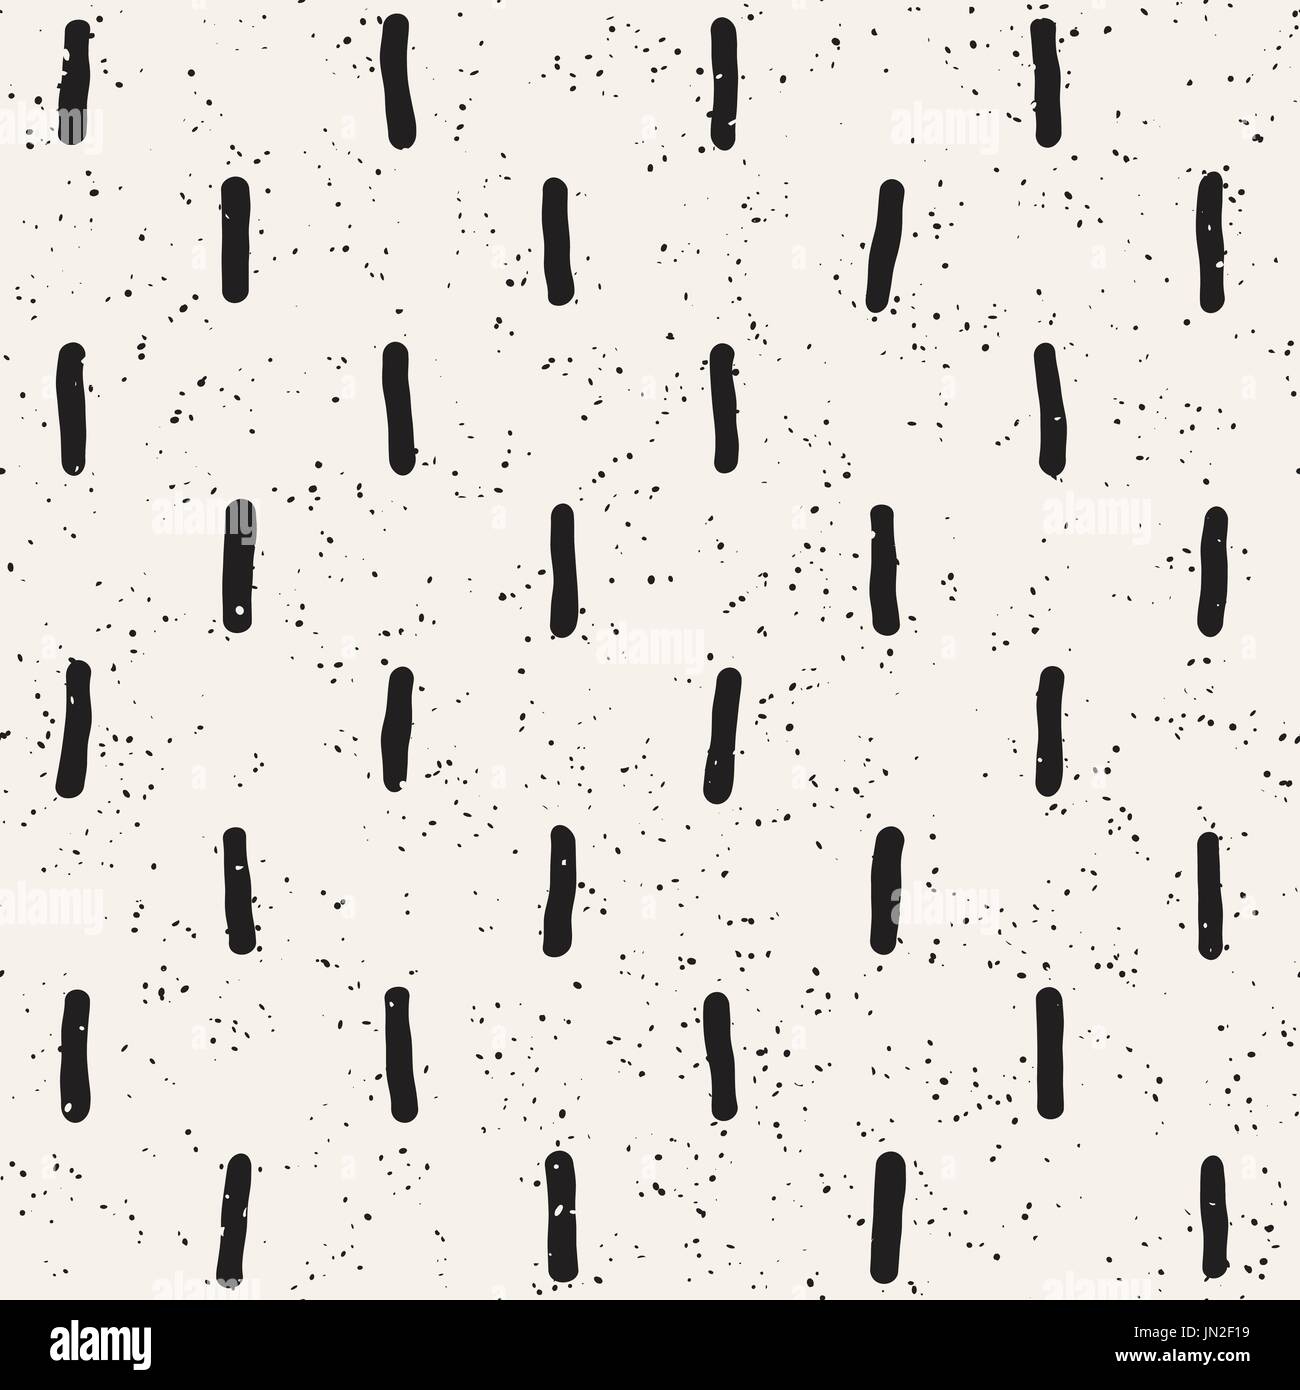 Seamless pattern with hand drawn lines. Abstract background with freehand brush strokes. Black and white grunge texture. Ornament for wrapping paper. Stock Vector